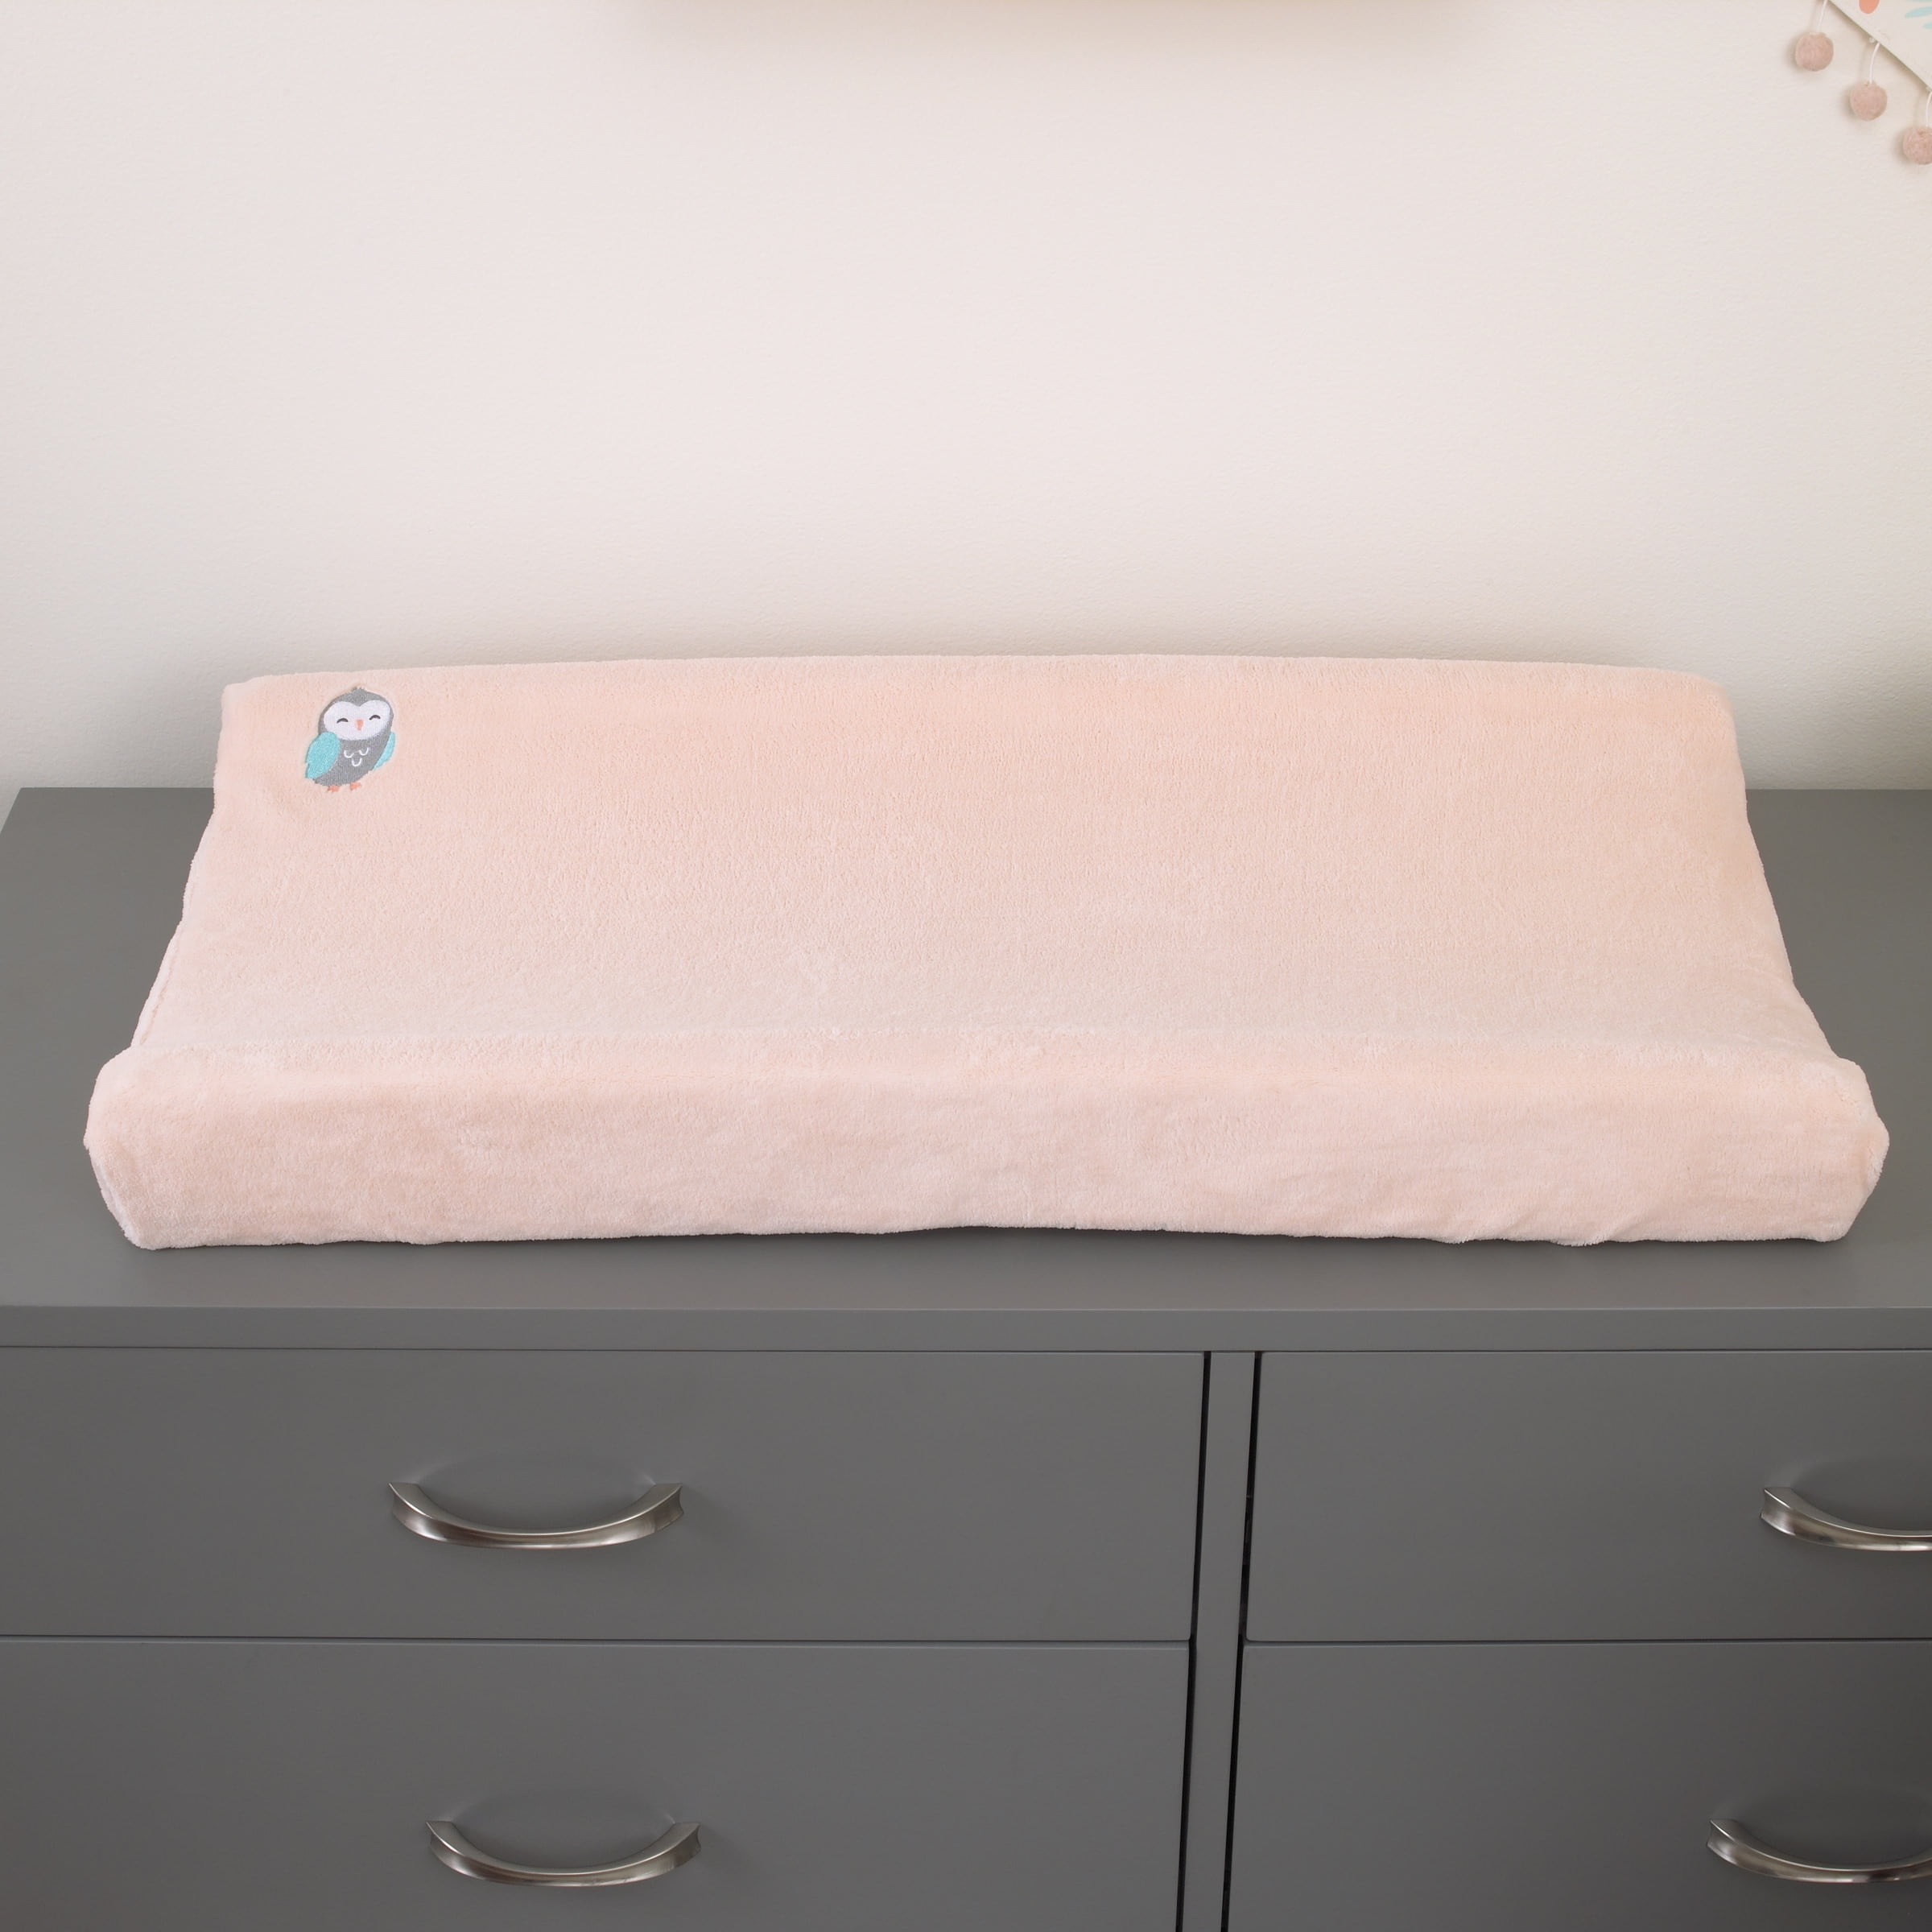 Carter's Woodland Meadow Plush Changing Table Cover 